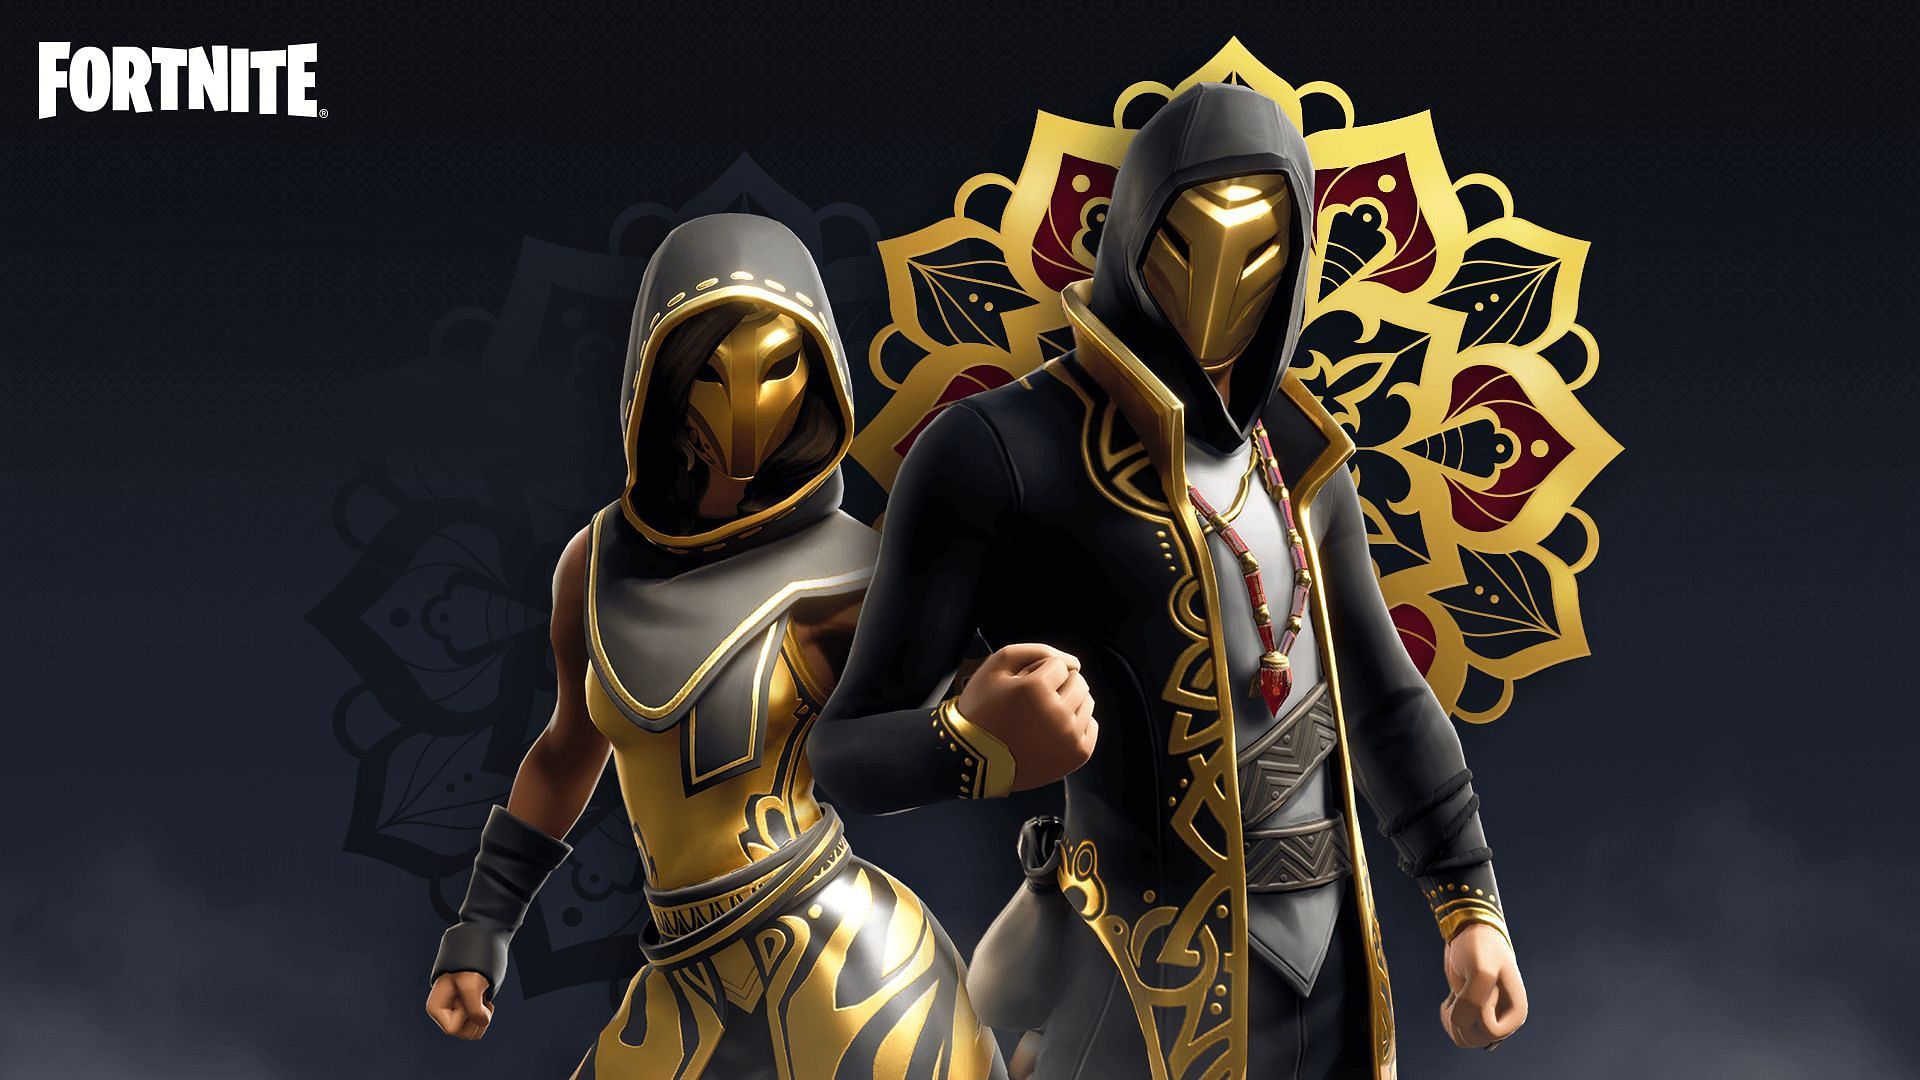 The event will last for a month and bring several new cosmetics. (Image via Epic Games)